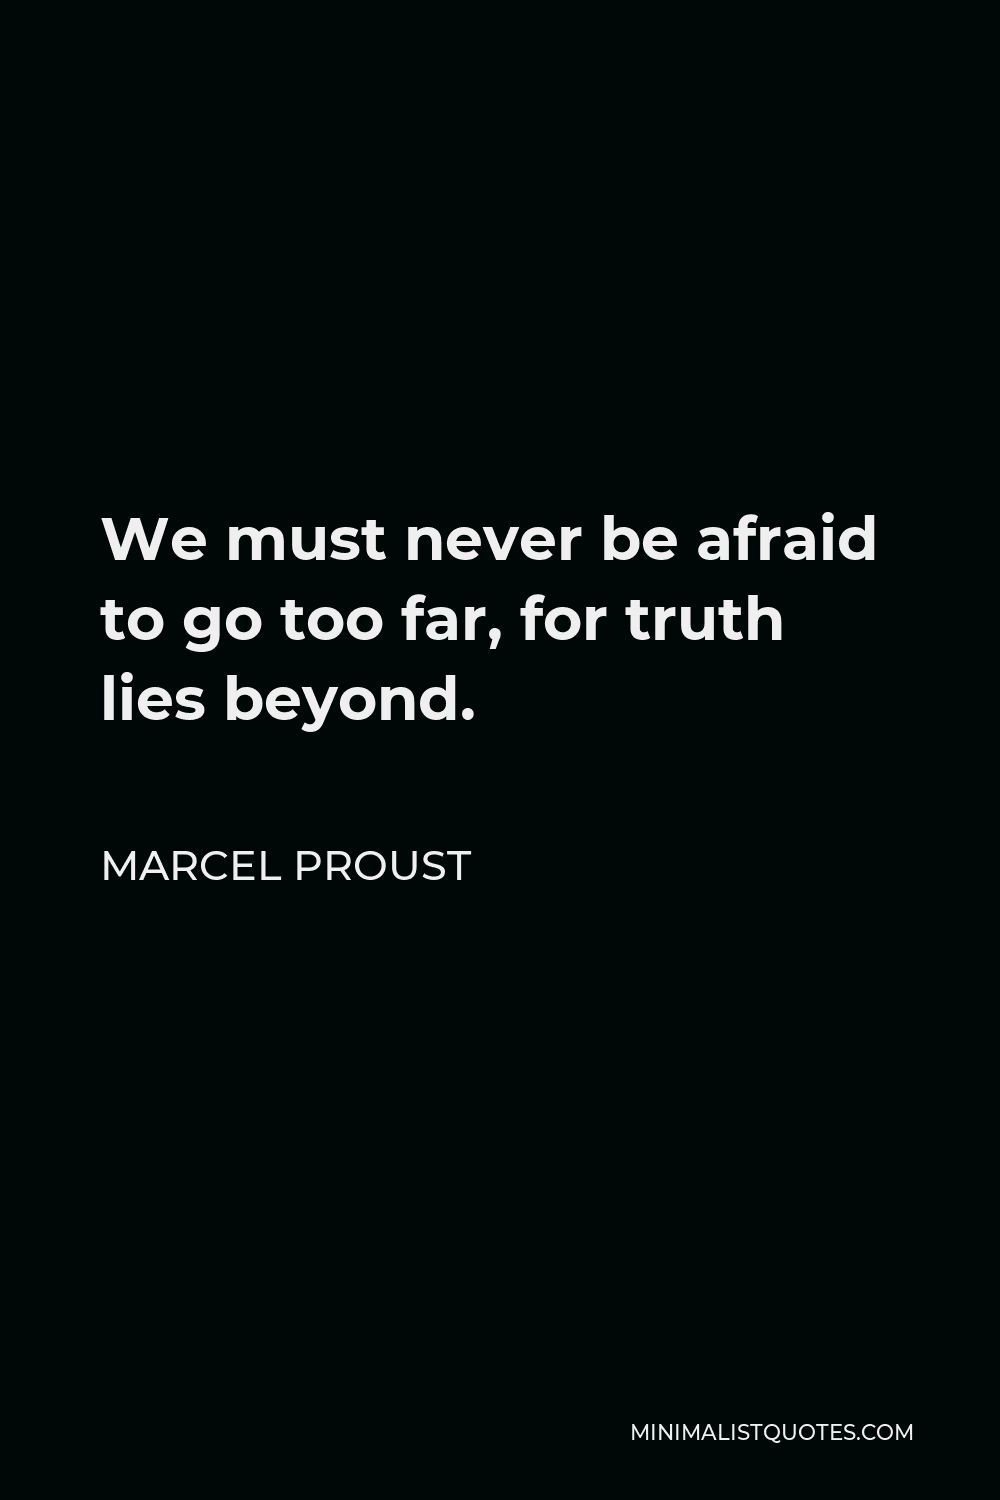 Marcel Proust Quote - We must never be afraid to go too far, for truth lies beyond.